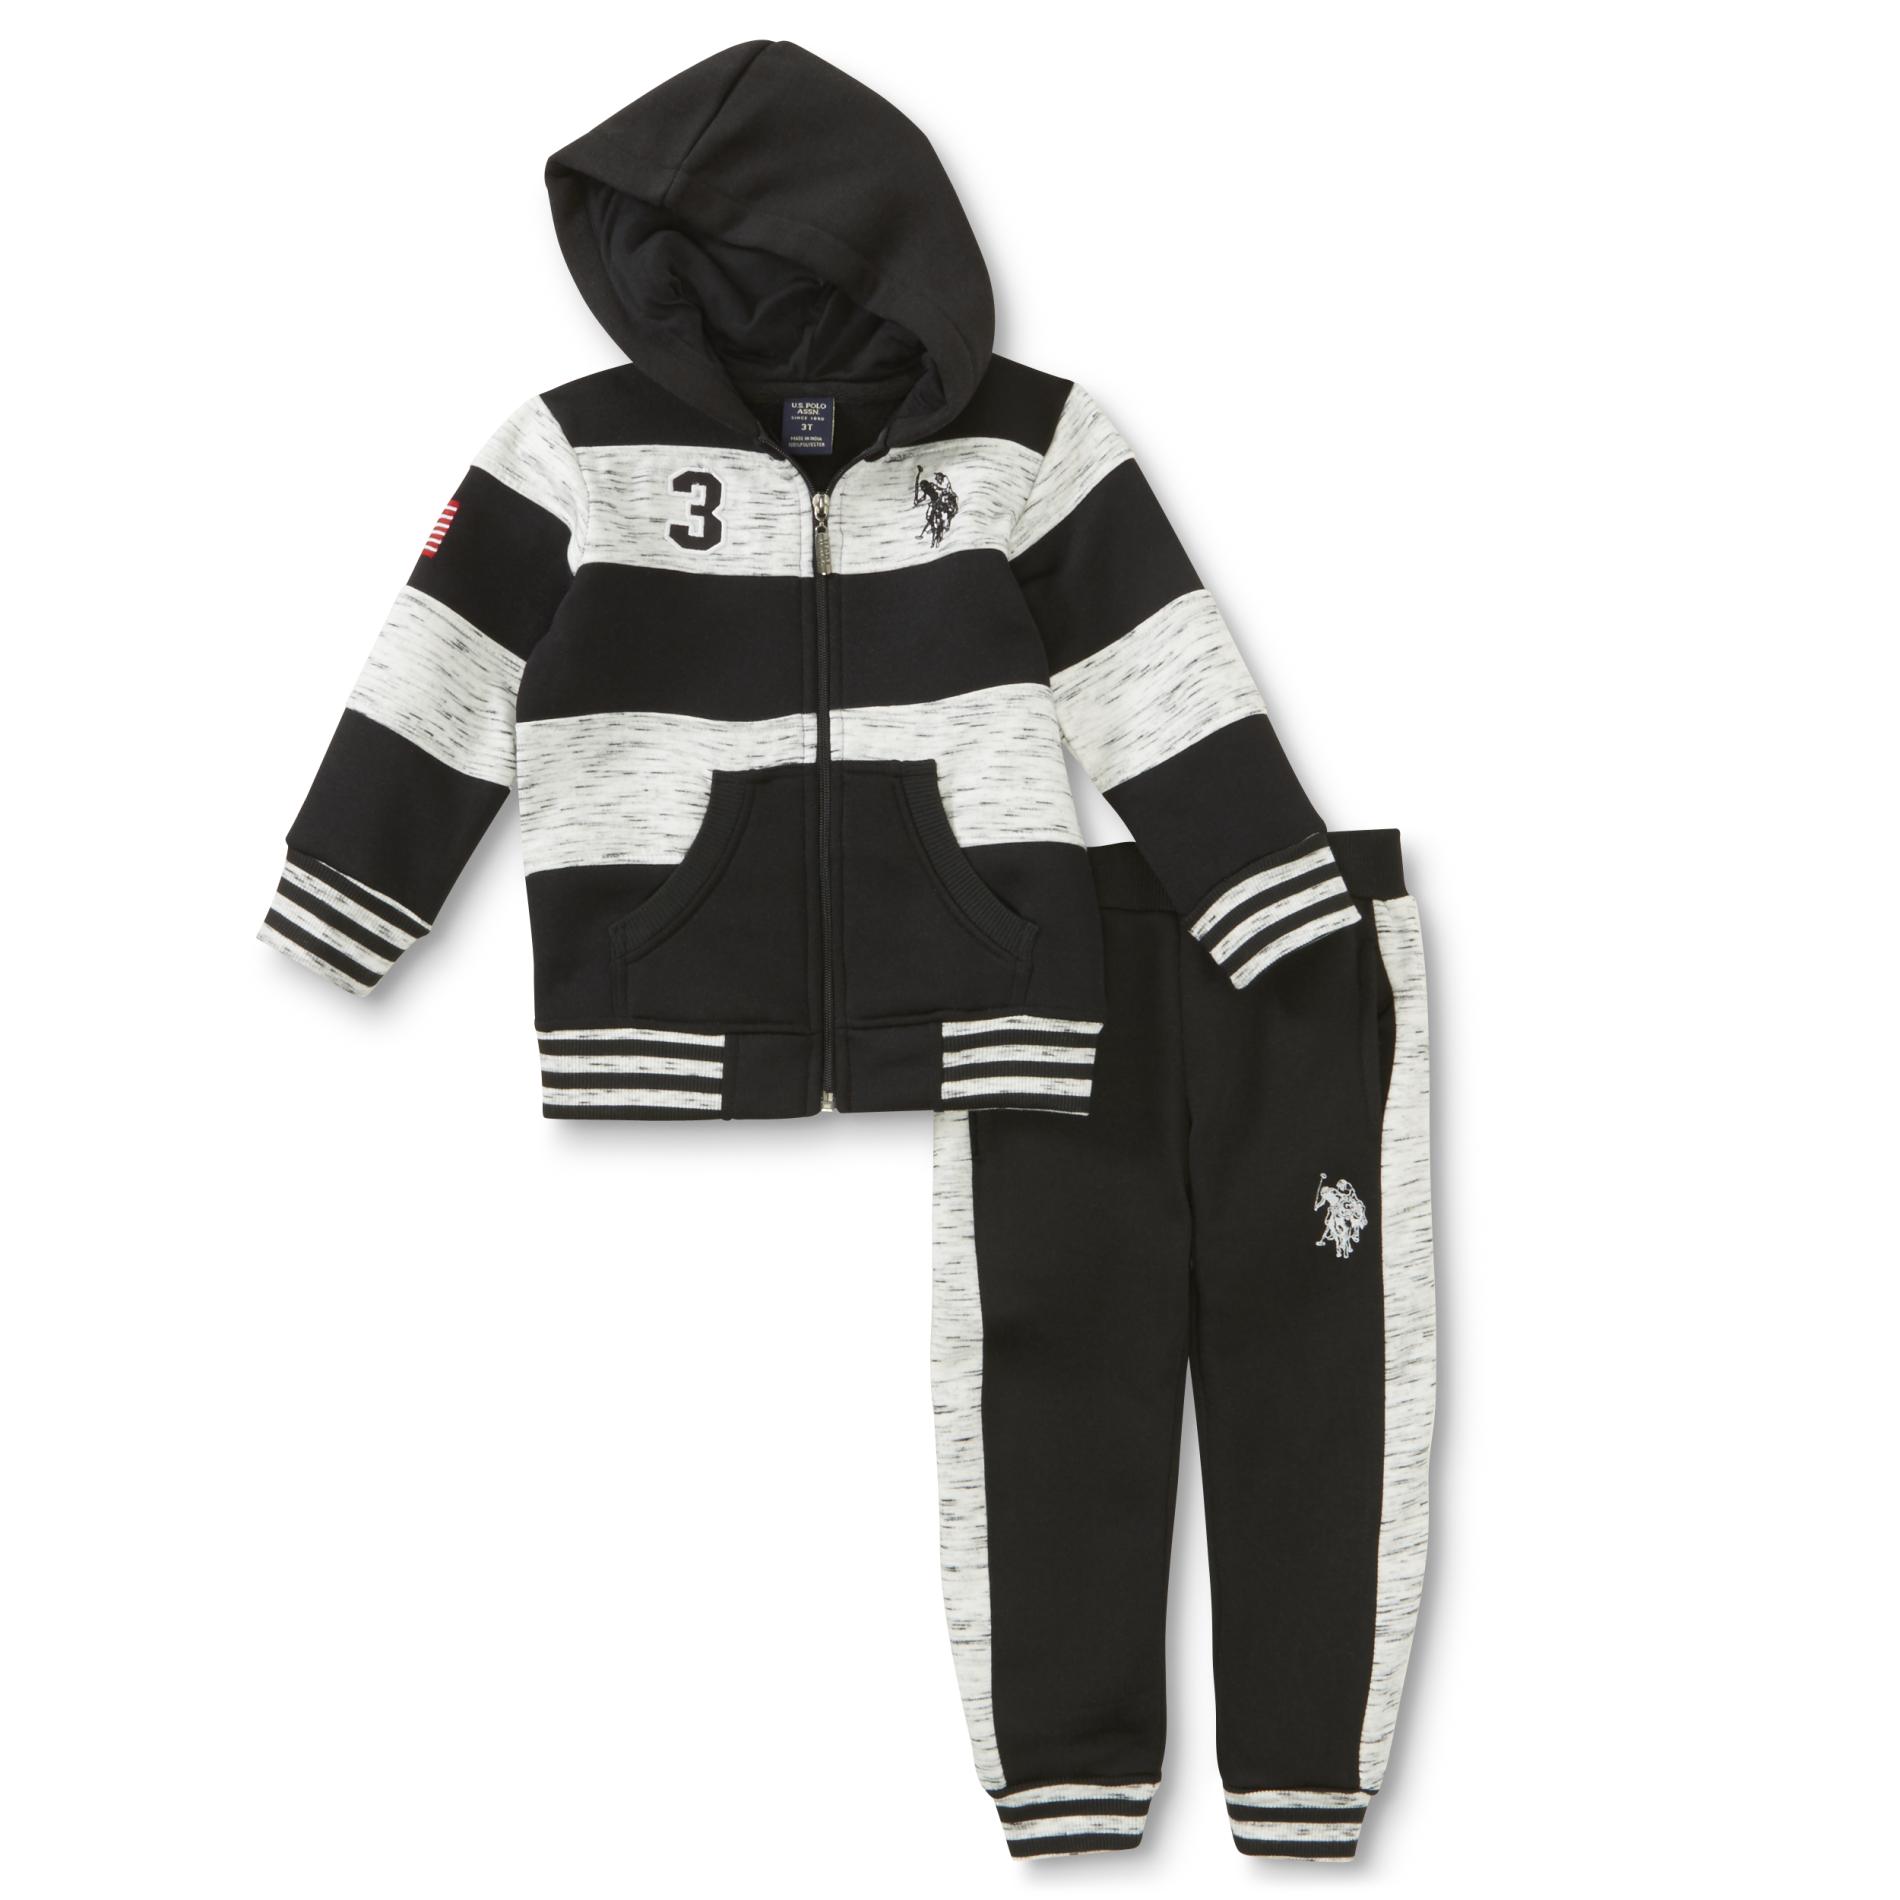 U.S. Polo Assn. Infant and Toddler Boys' Hoodie Jacket & Sweatpants - Striped